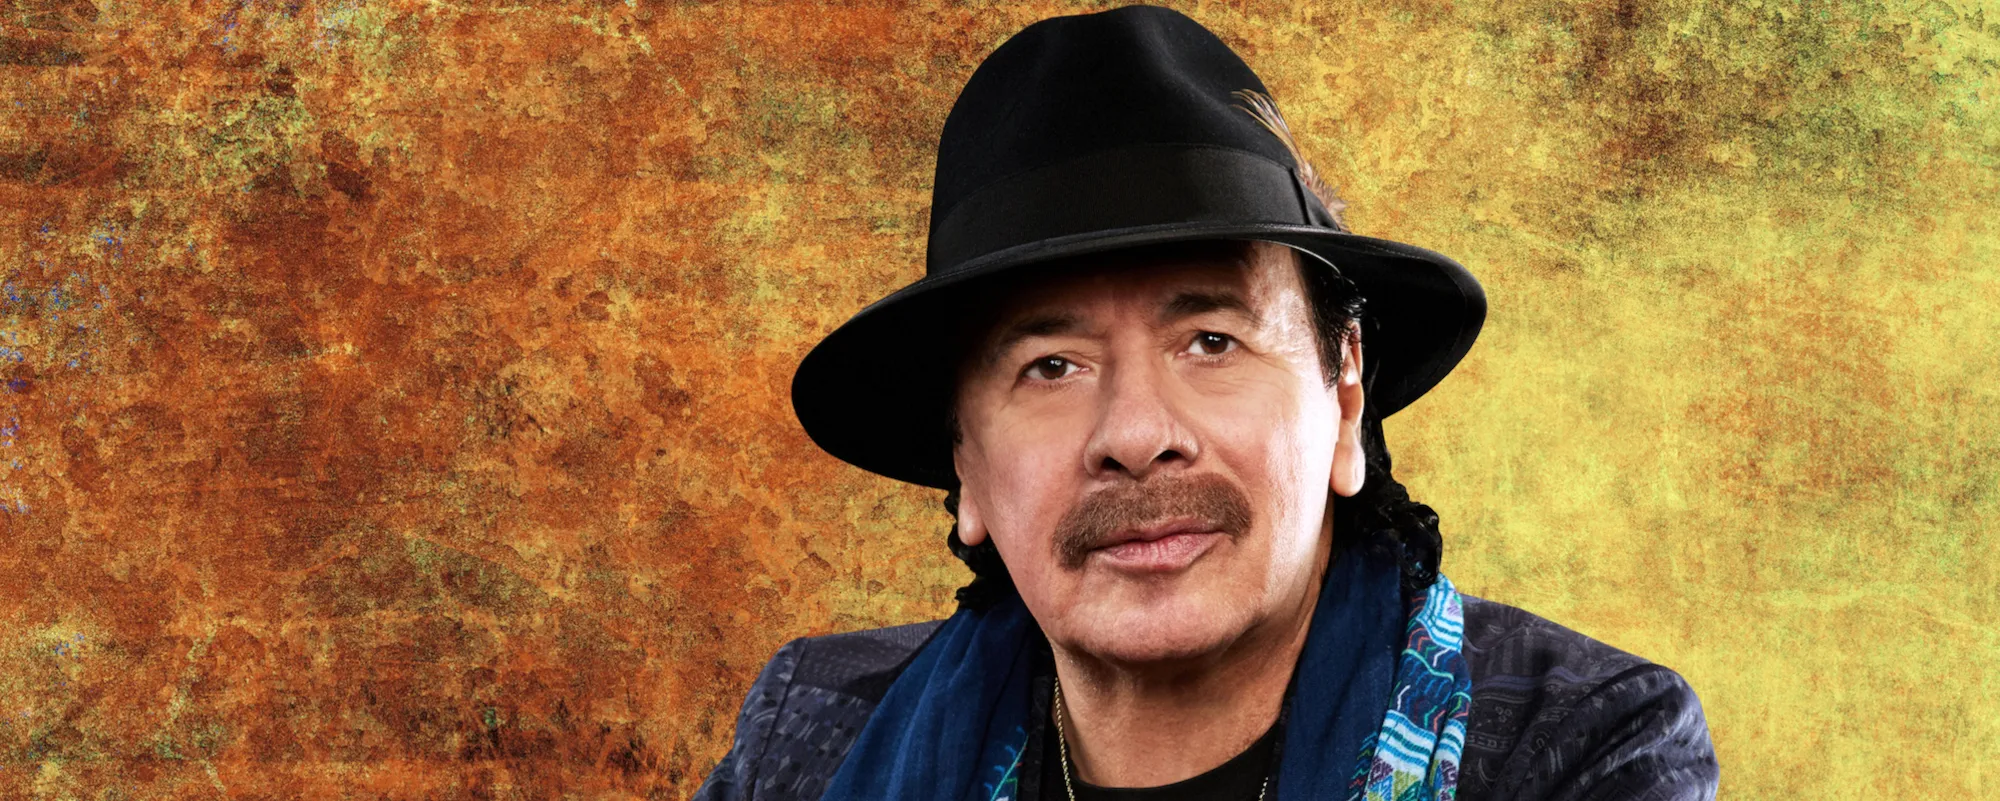 New Rock Songs Teased, Released From Santana, GNR, and Tom Morello